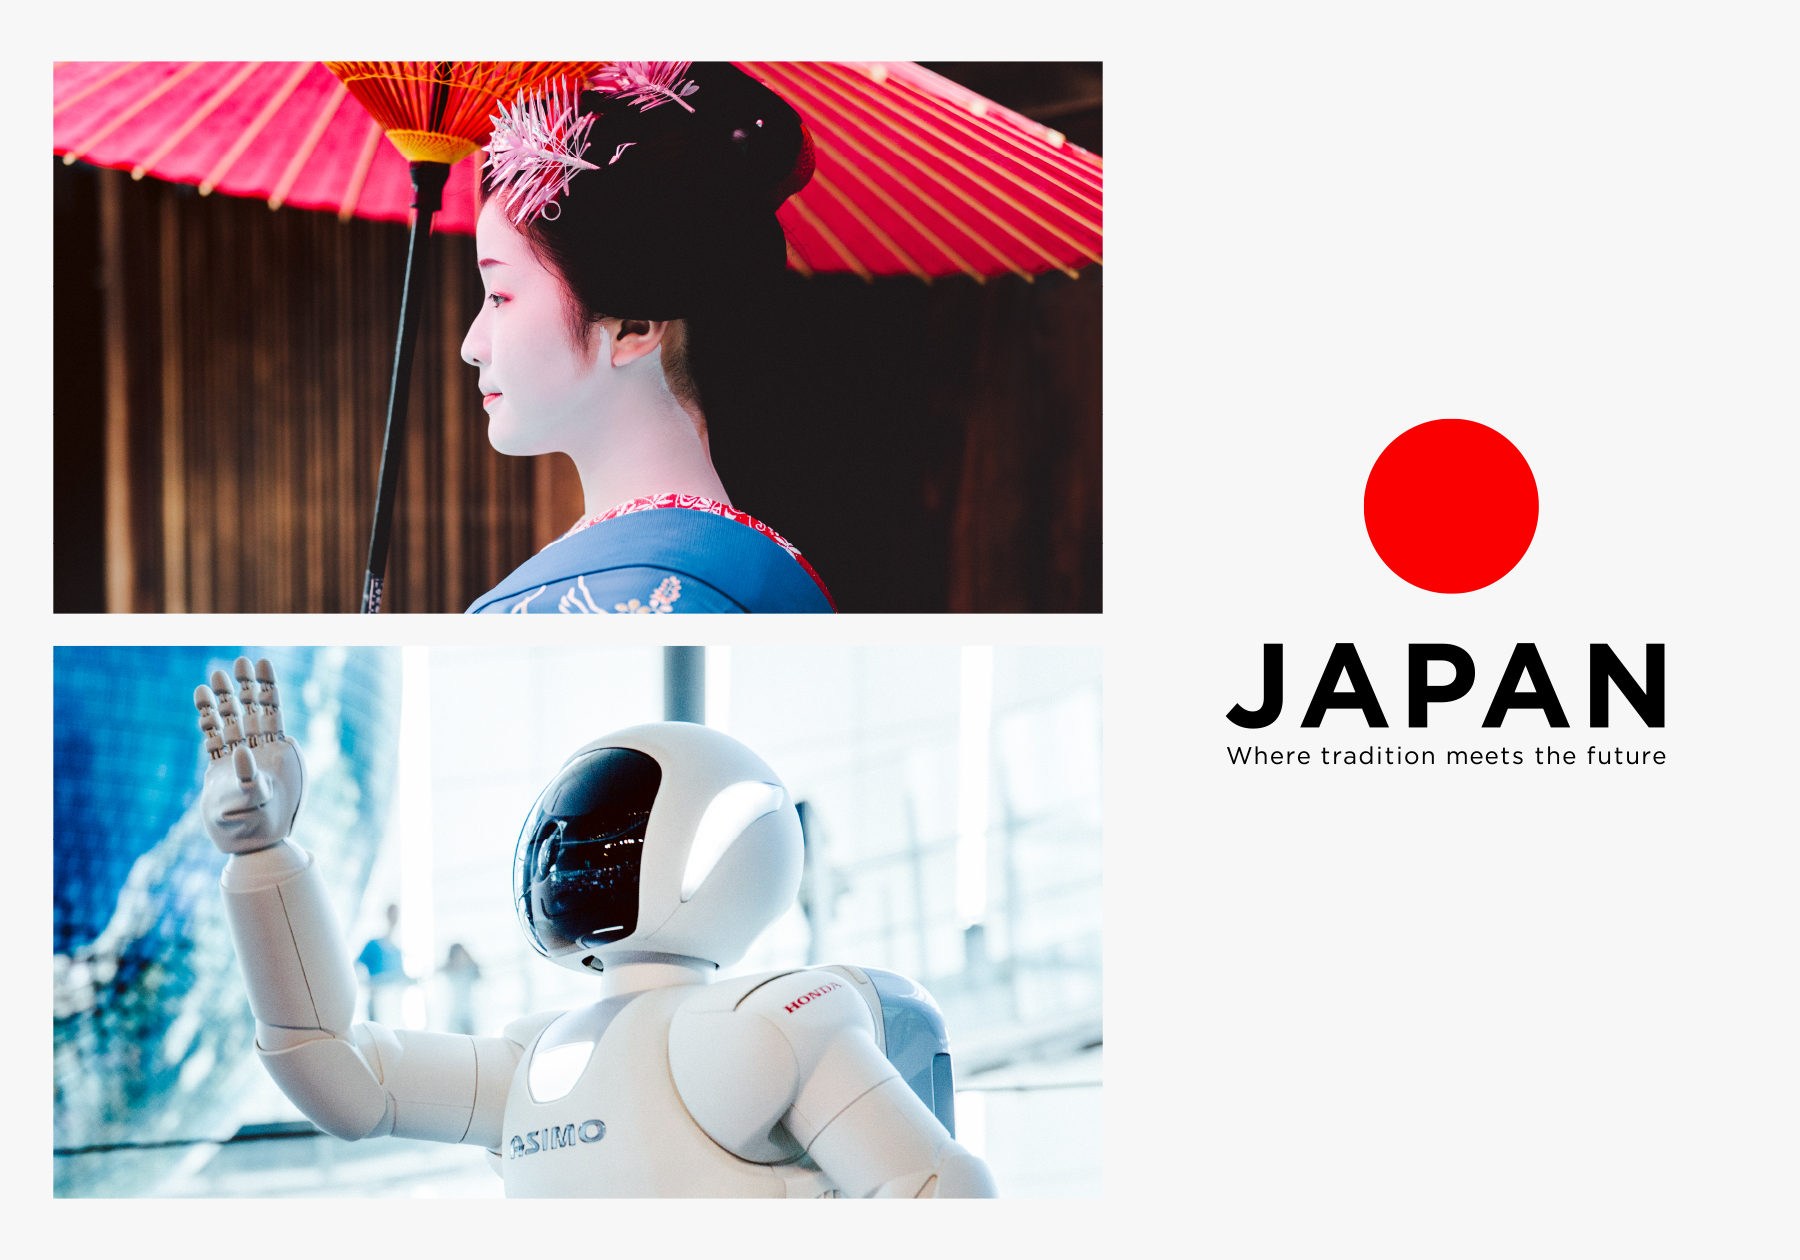 「JAPAN – Where tradition meets the future」のアイキャッチ画像